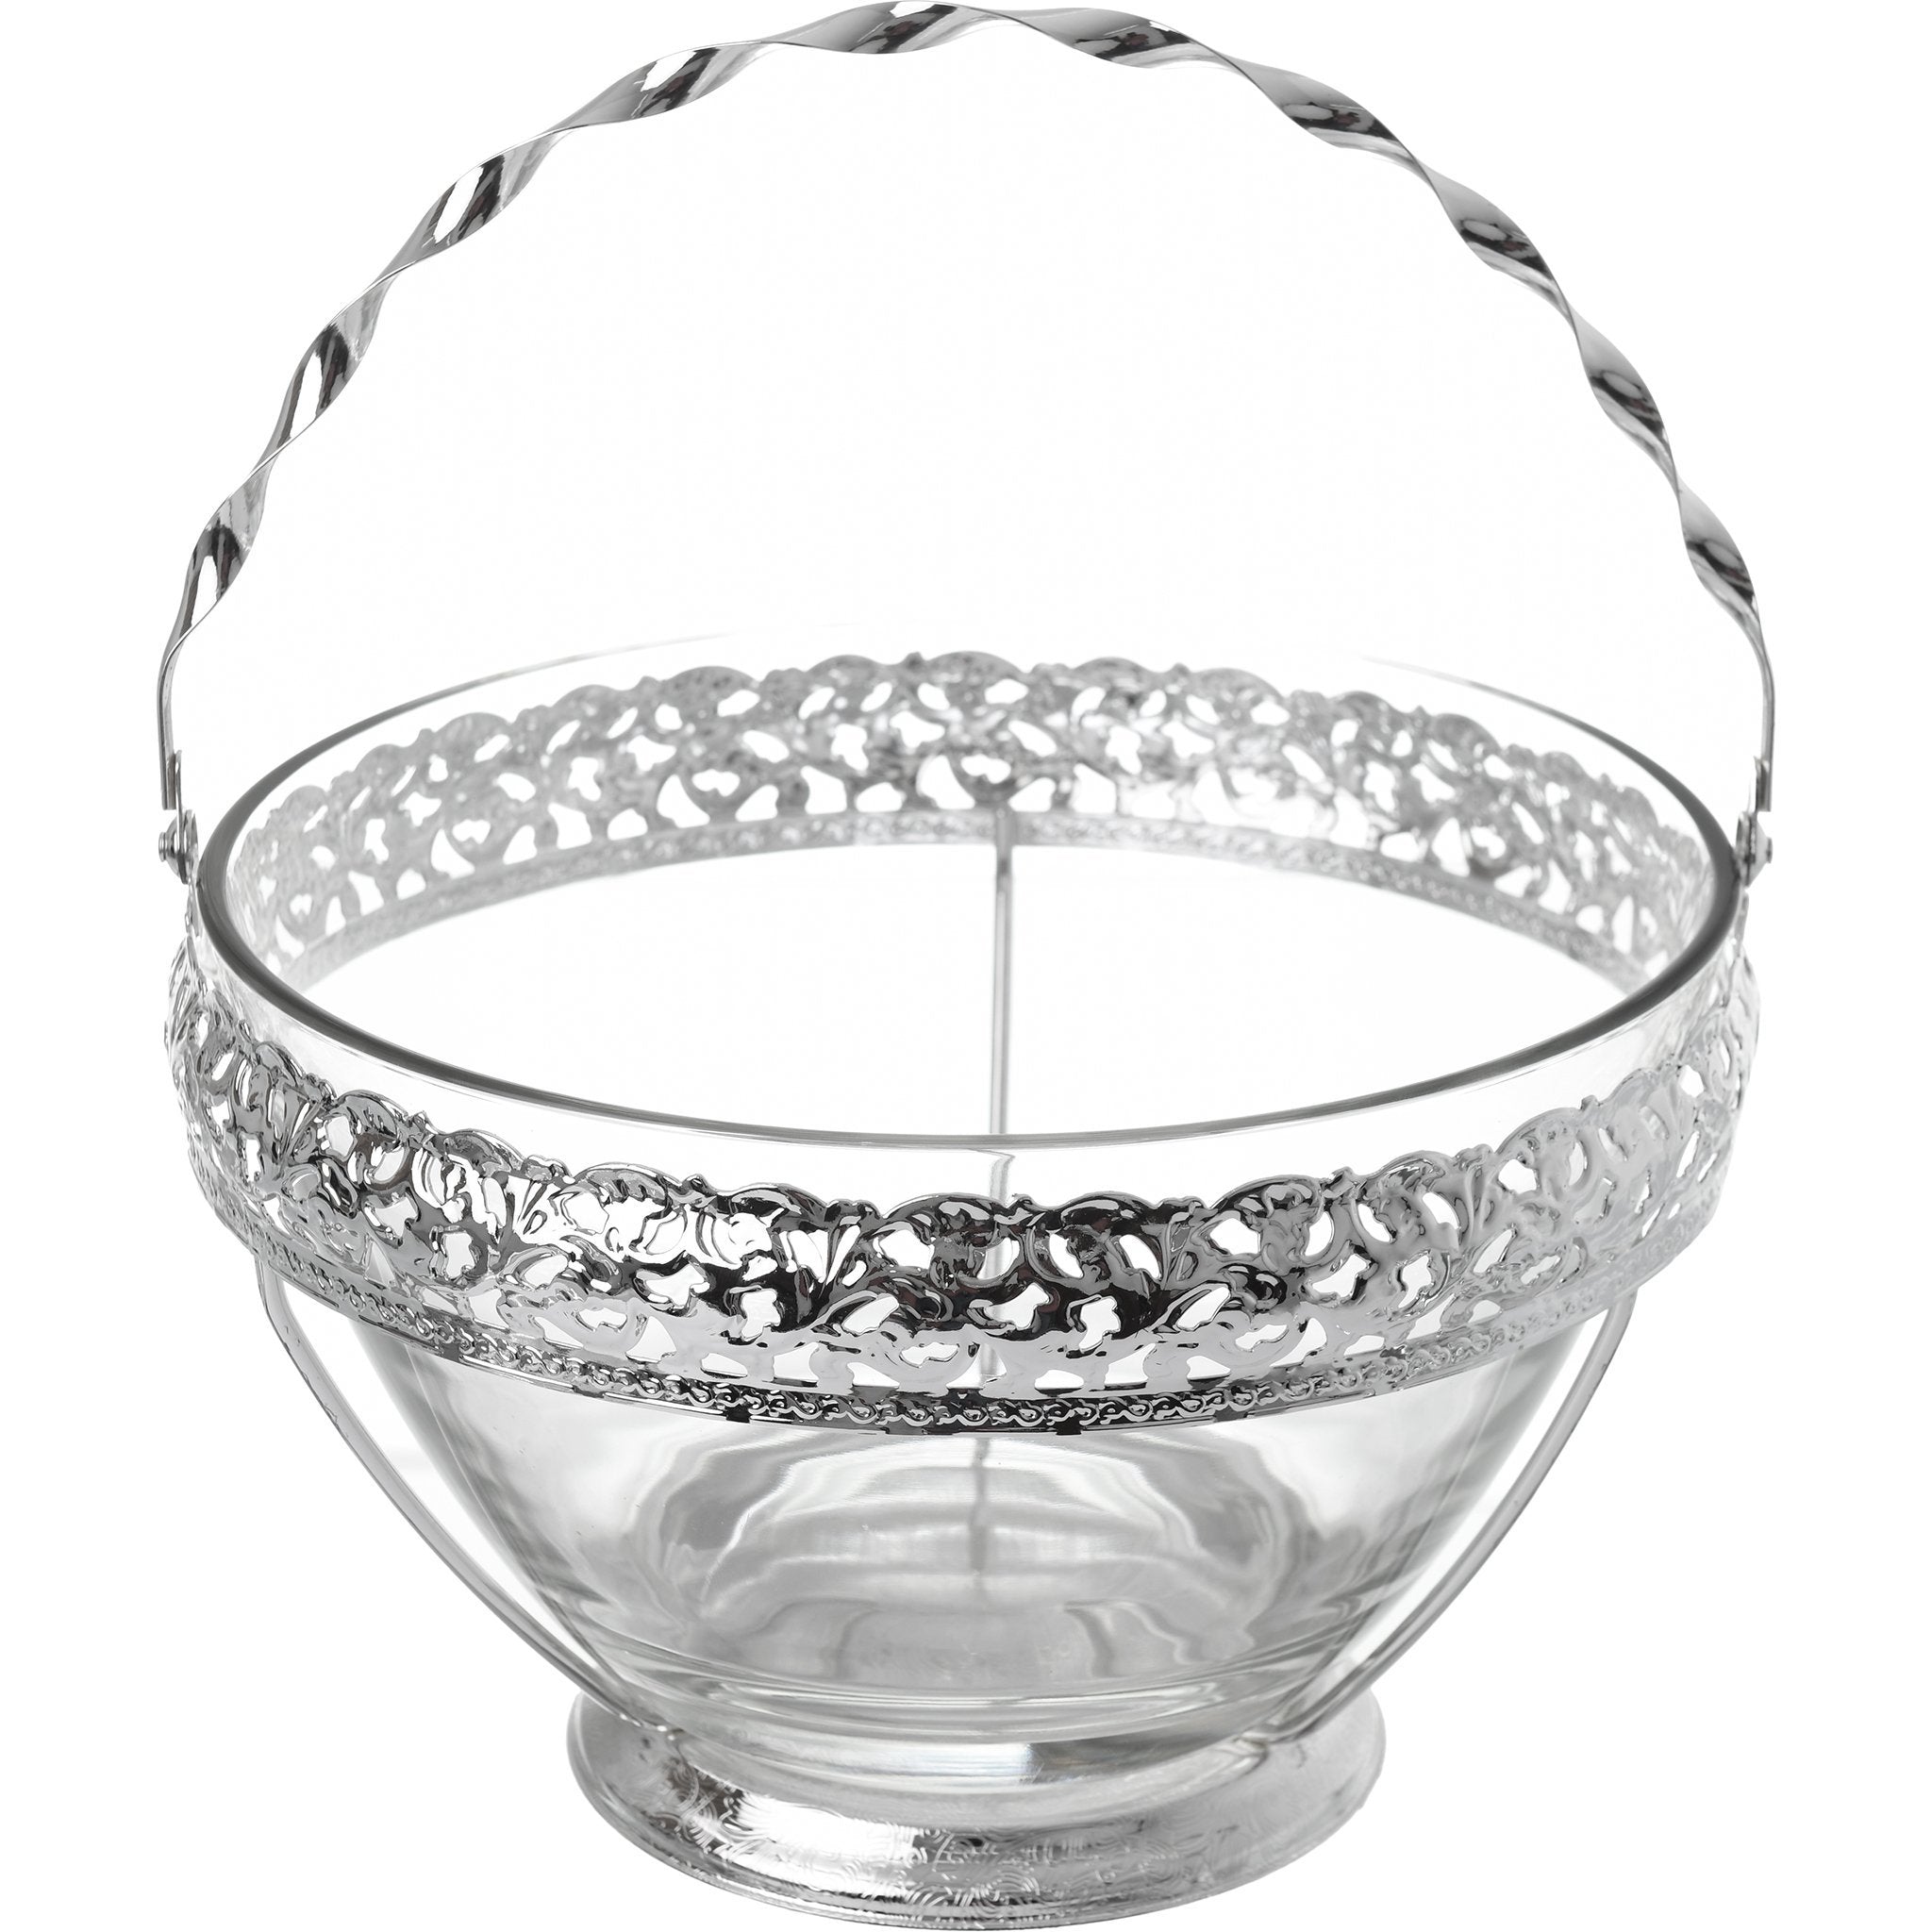 Queen Anne - Large Glass Fruit Bowl with Silver Plated Frame & Wavy Handle - Silver Plated Metal & Glass - 24.5x16.5cm - 26000308